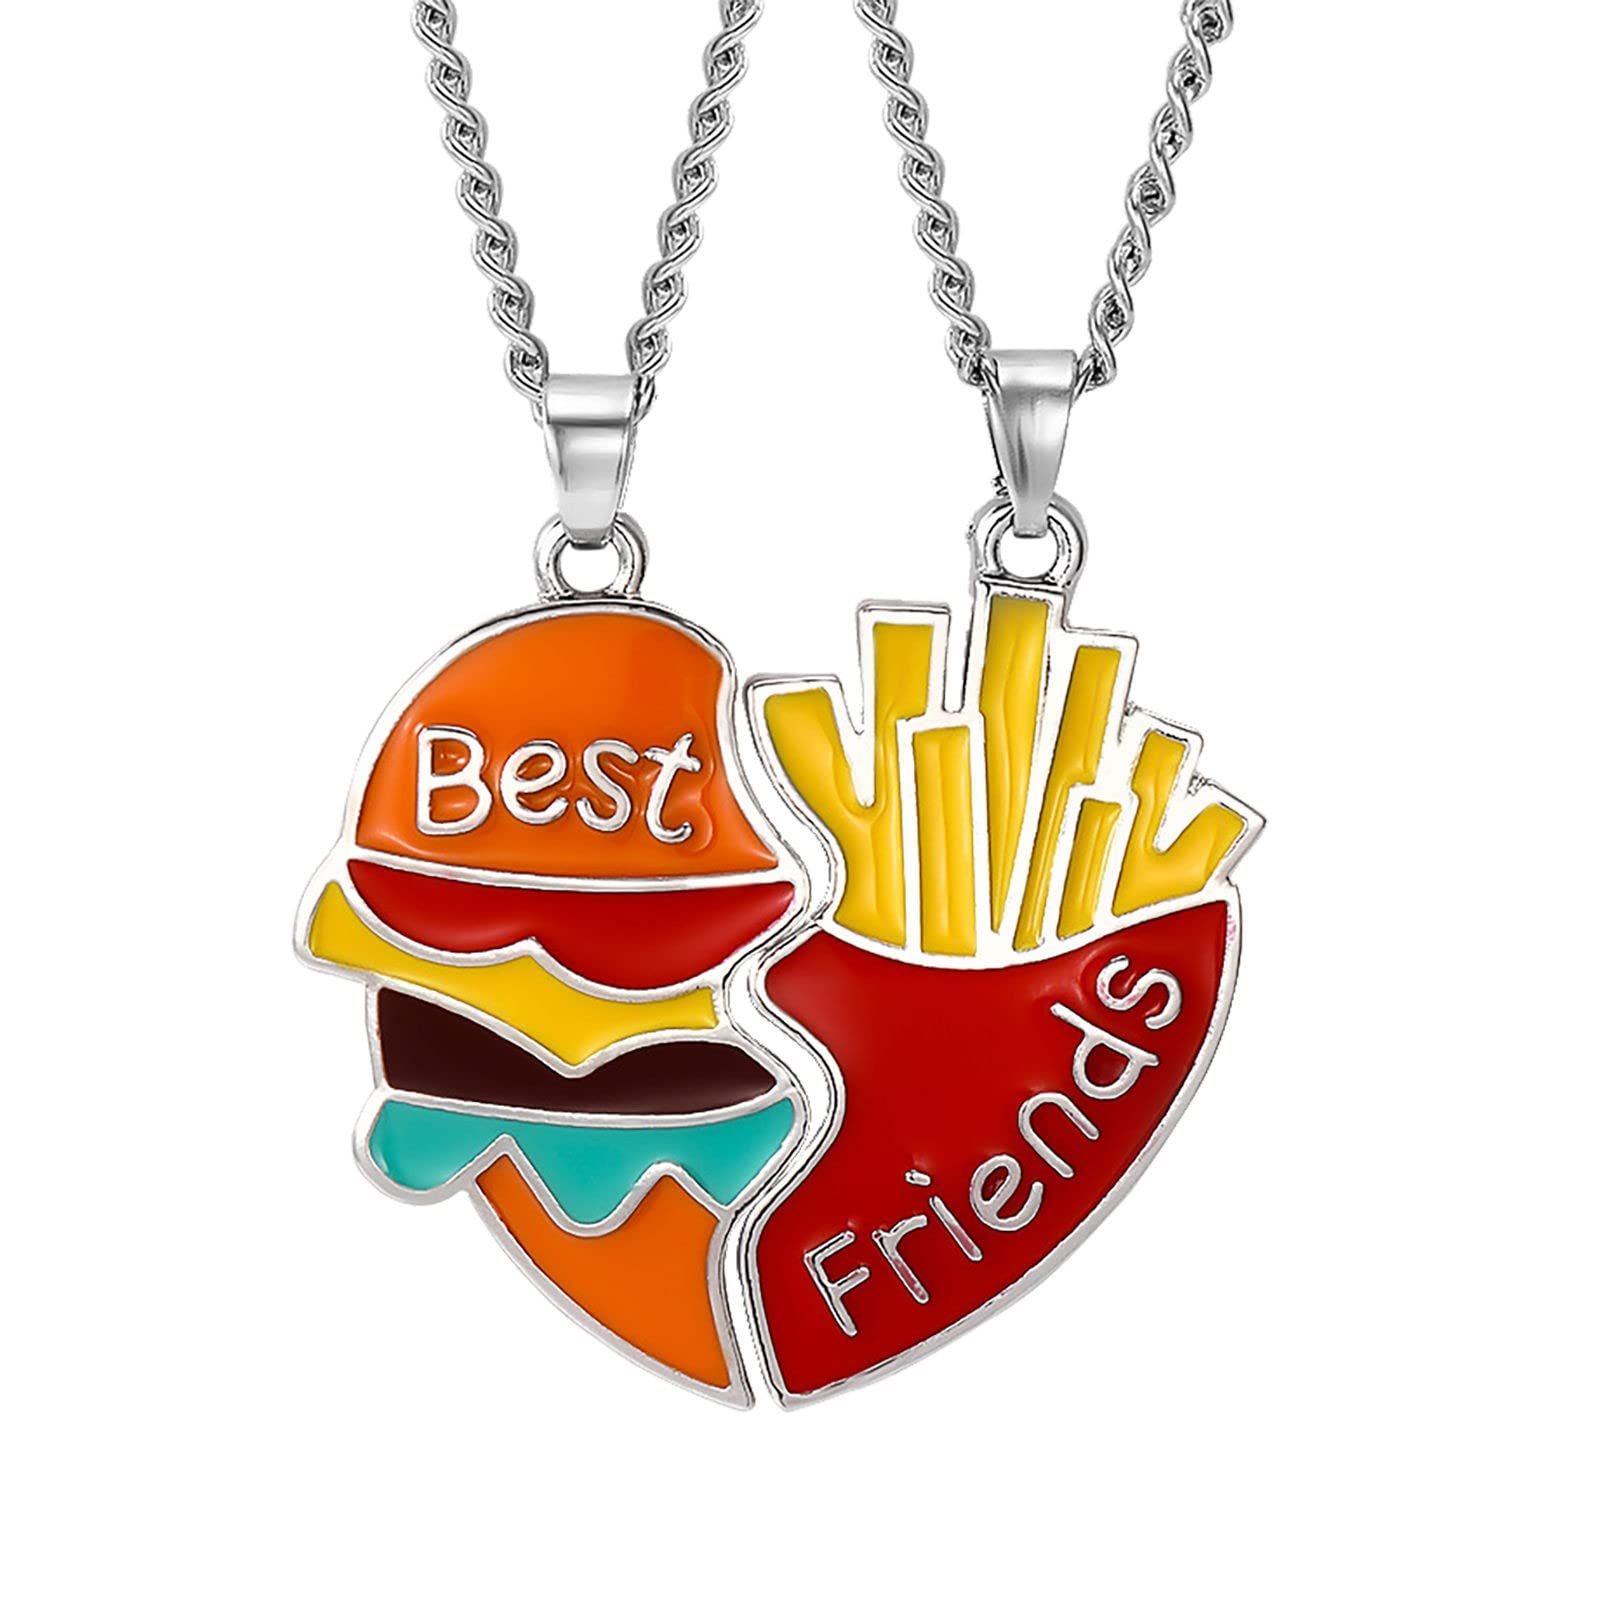 2 Pcs Friendship Pendant Necklace for Women 2-Split Best Friend Forever Necklace Funny Burger and Fries Statement Necklace Teen Girls Jewelry Birthday Gifts Gold Moon Pendant (as show, One Size)